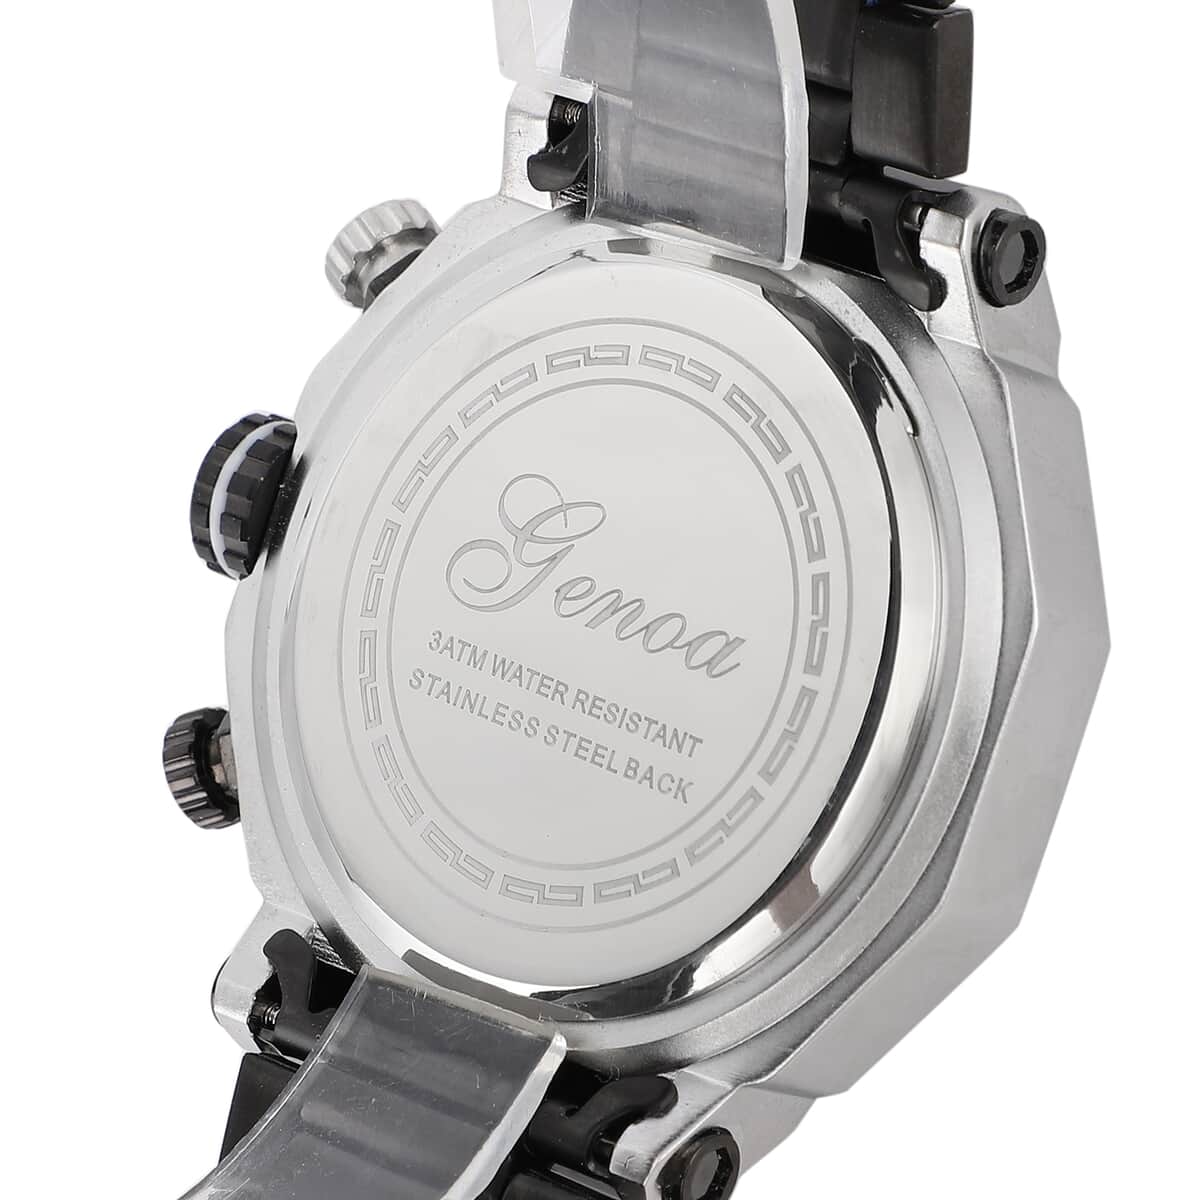 Genoa Multi-Functional Quartz Movement Watch with White Dial & ION Plated Black Stainless Steel Strap (49 mm) image number 5